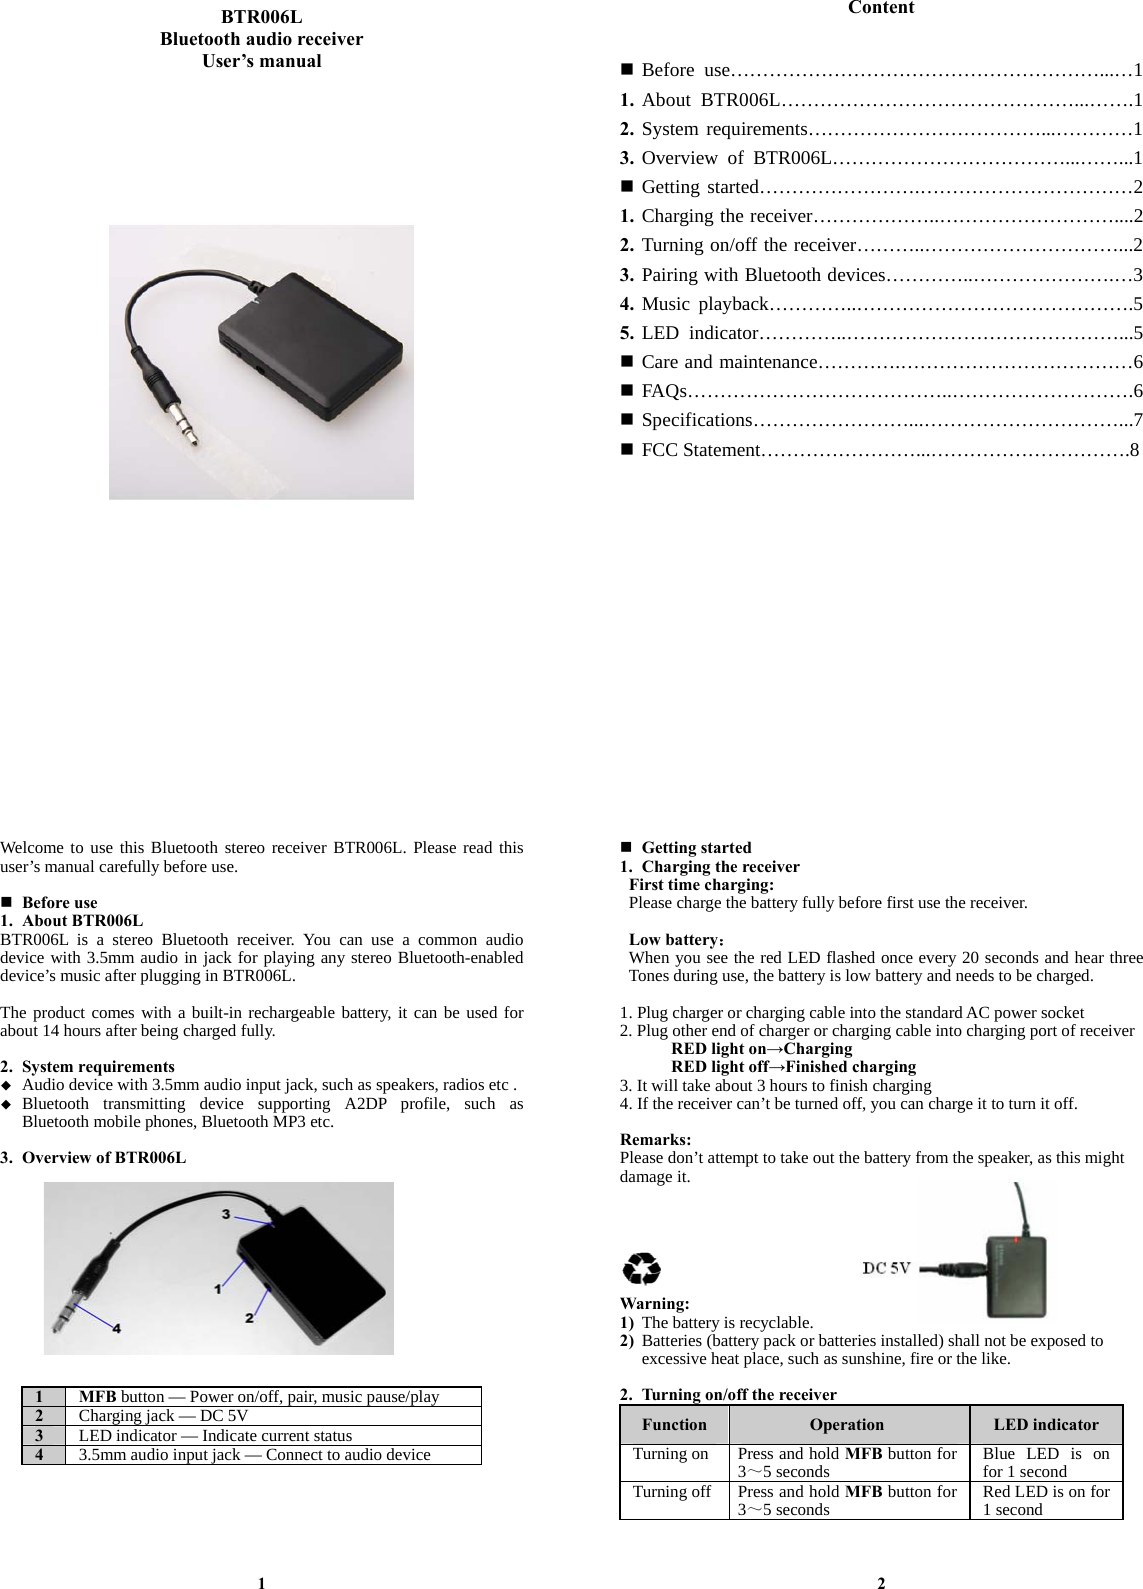   BTR006L Bluetooth audio receiver User’s manual                                      Content    Before use…………………………………………………...…1 1. About BTR006L………………………………………...…….1 2. System requirements………………………………...…………1 3. Overview of BTR006L………………………………...……...1  Getting started…………………….……………………………2 1. Charging the receiver………………..………………………....2 2. Turning on/off the receiver………..…………………………...2 3. Pairing with Bluetooth devices…………..………………….…3 4. Music playback…………..…………………………………….5 5. LED indicator…………..……………………………………...5  Care and maintenance………….………………………………6  FAQs…………………………………..……………………….6  Specifications……………………...…………………………...7  FCC Statement……………………...………………………….8               Welcome to use this Bluetooth stereo receiver BTR006L. Please read this user’s manual carefully before use.   Before use 1. About BTR006L BTR006L is a stereo Bluetooth receiver. You can use a common audio device with 3.5mm audio in jack for playing any stereo Bluetooth-enabled device’s music after plugging in BTR006L.    The product comes with a built-in rechargeable battery, it can be used for about 14 hours after being charged fully.  2. System requirements  Audio device with 3.5mm audio input jack, such as speakers, radios etc .  Bluetooth transmitting device supporting A2DP profile, such as Bluetooth mobile phones, Bluetooth MP3 etc.  3. Overview of BTR006L             1 MFB button — Power on/off, pair, music pause/play 2  Charging jack — DC 5V 3  LED indicator — Indicate current status 4  3.5mm audio input jack — Connect to audio device       1  Getting started 1. Charging the receiver First time charging: Please charge the battery fully before first use the receiver.  Low battery： When you see the red LED flashed once every 20 seconds and hear three Tones during use, the battery is low battery and needs to be charged.  1. Plug charger or charging cable into the standard AC power socket 2. Plug other end of charger or charging cable into charging port of receiver RED light on→Charging RED light off→Finished charging 3. It will take about 3 hours to finish charging 4. If the receiver can’t be turned off, you can charge it to turn it off.  Remarks: Please don’t attempt to take out the battery from the speaker, as this might damage it.       Warning: 1) The battery is recyclable. 2) Batteries (battery pack or batteries installed) shall not be exposed to excessive heat place, such as sunshine, fire or the like.  2. Turning on/off the receiver Function  Operation  LED indicator Turning on Press and hold MFB button for 3～5 seconds  Blue LED is on for 1 secondTurning off Press and hold MFB button for 3～5 seconds  Red LED is on for 1 second   2 